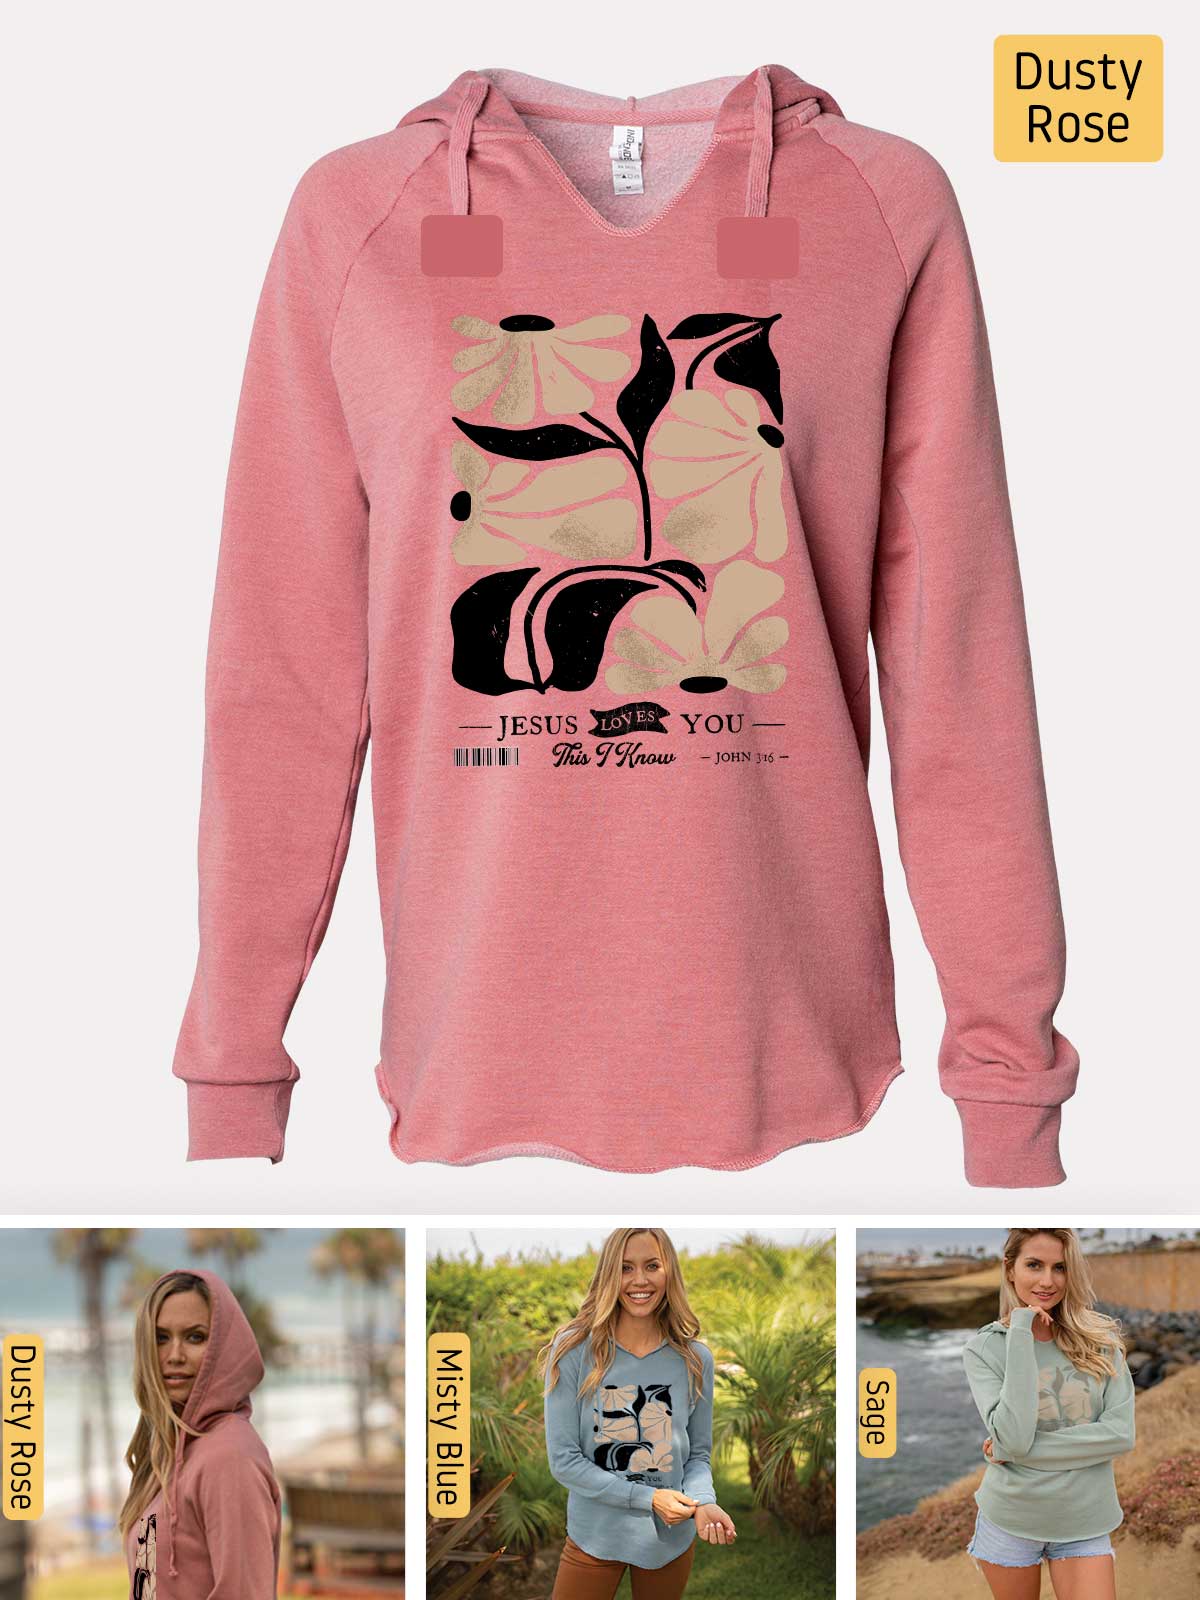 a woman wearing a pink sweatshirt with a horse on it